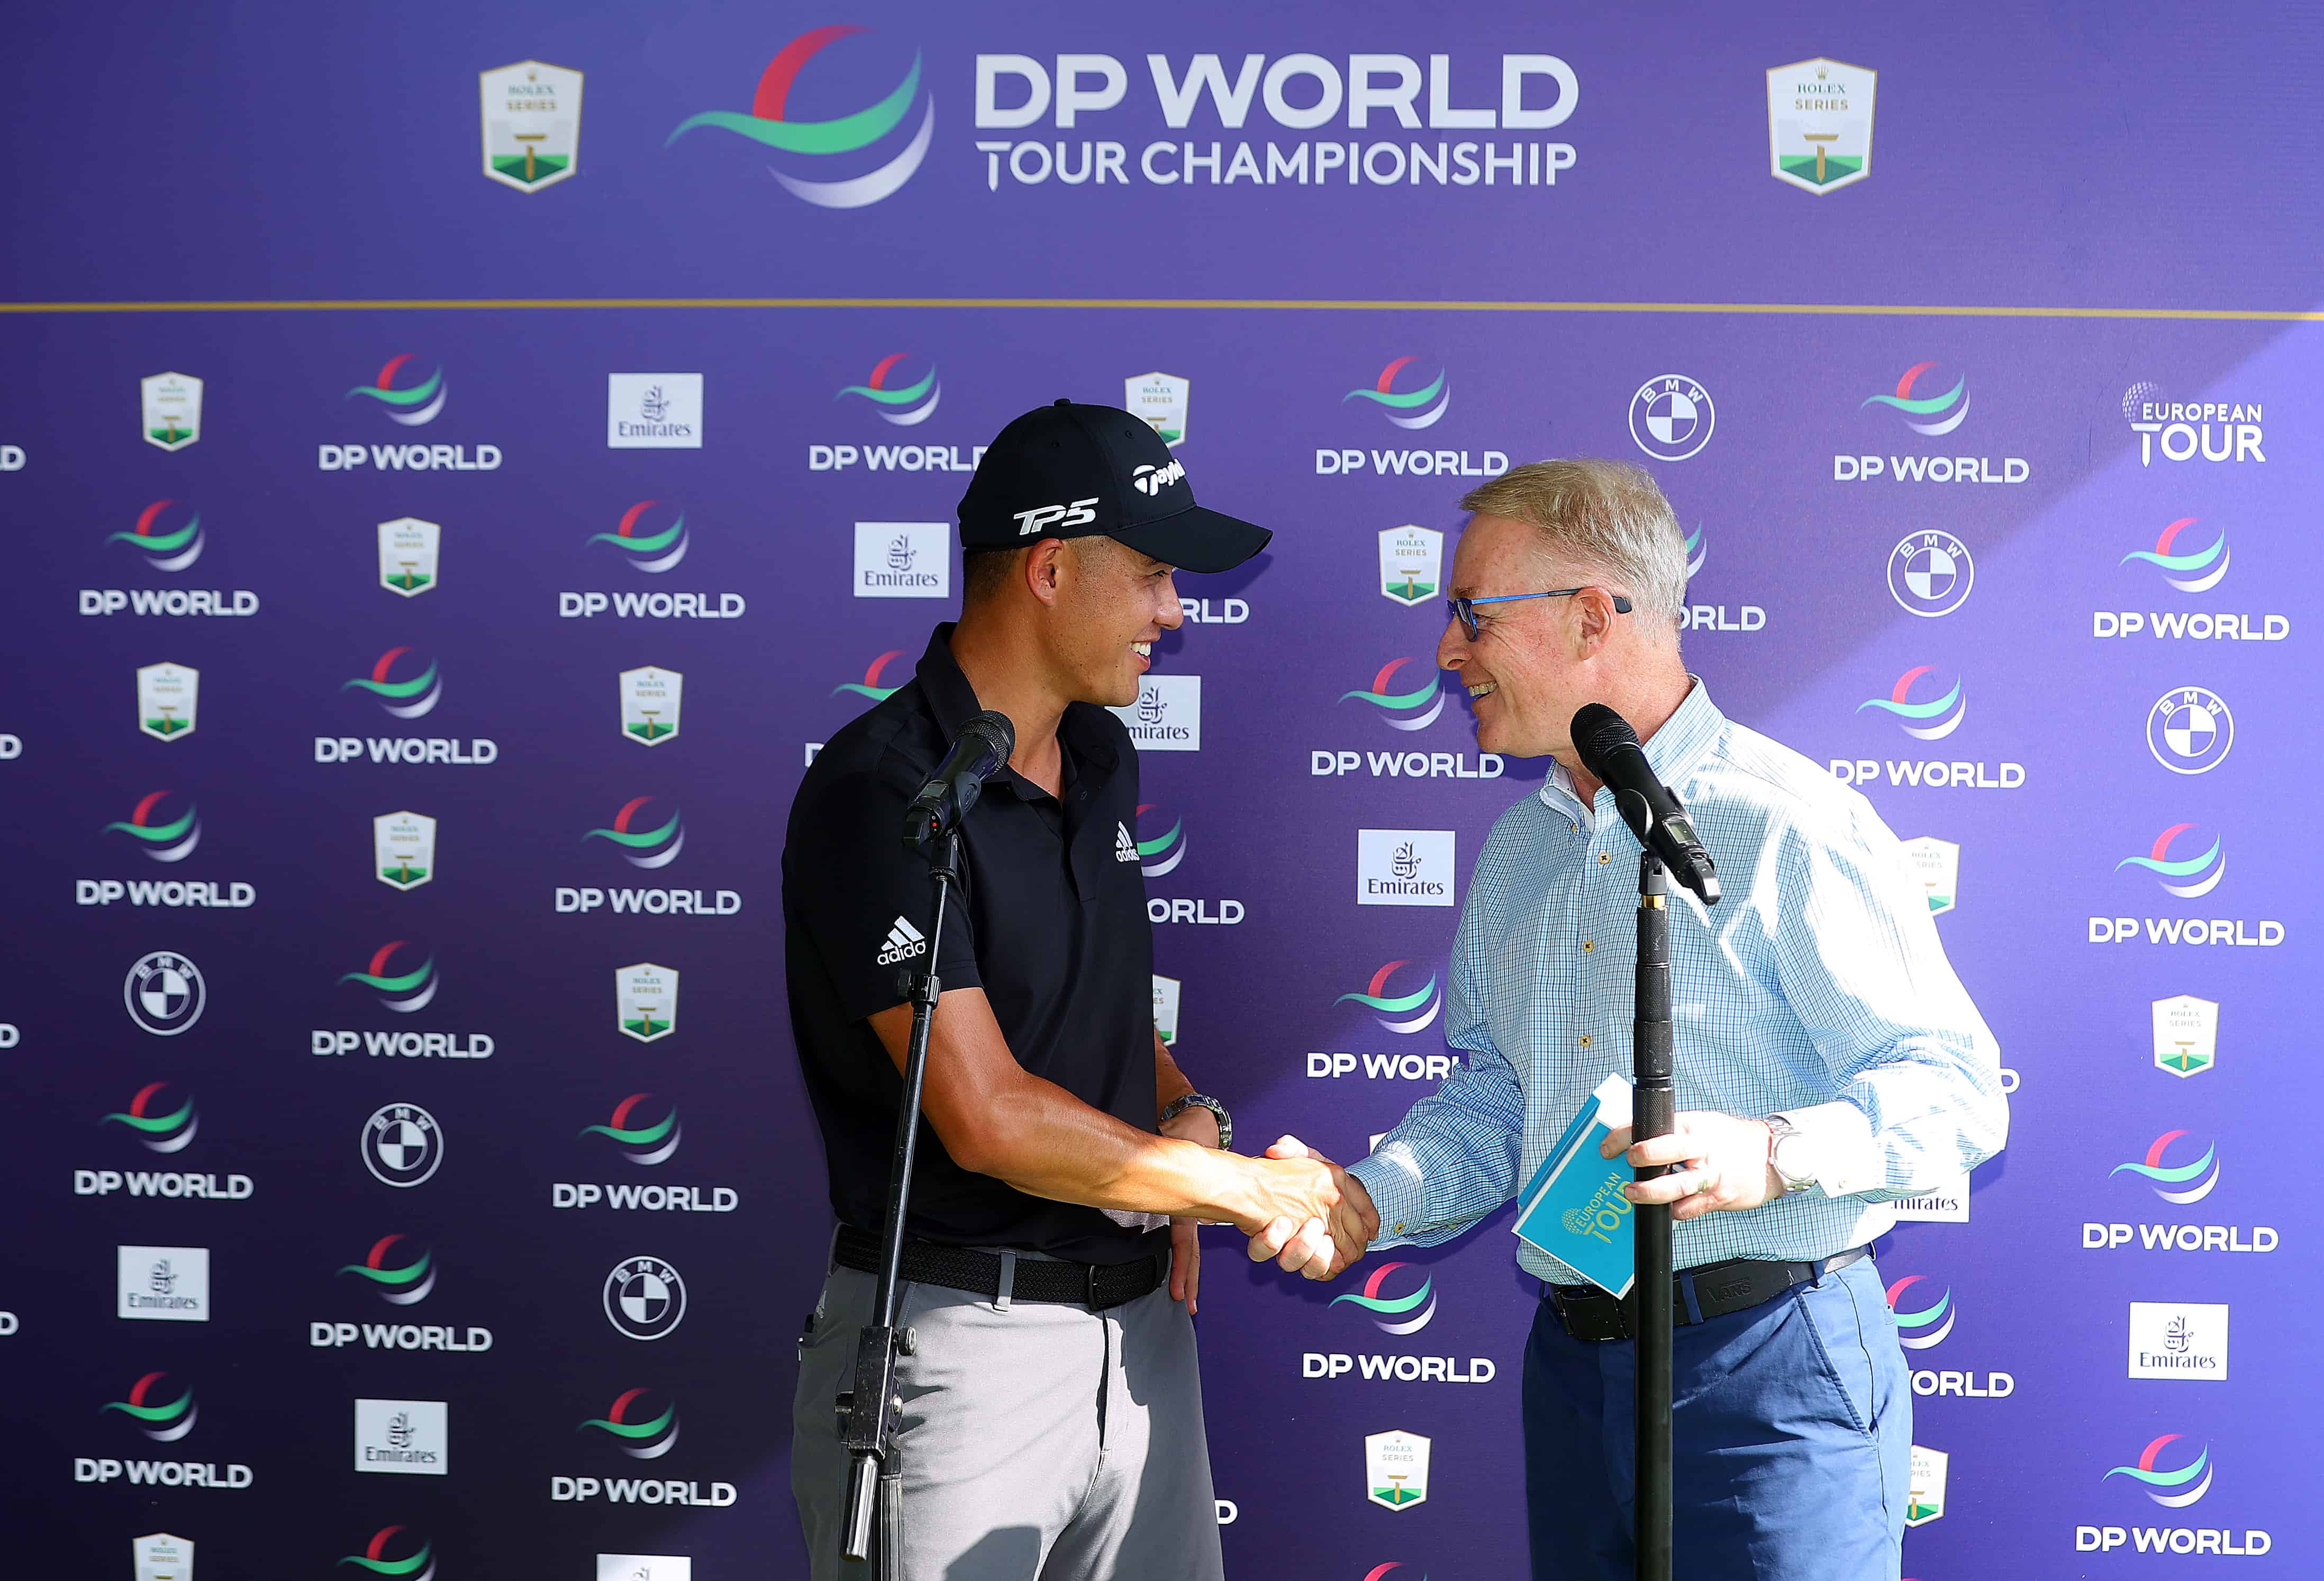 Perth World Super 6: Fireworks, DJs on the tee: Is Keith Pelley's GolfSixes  the future of golf?